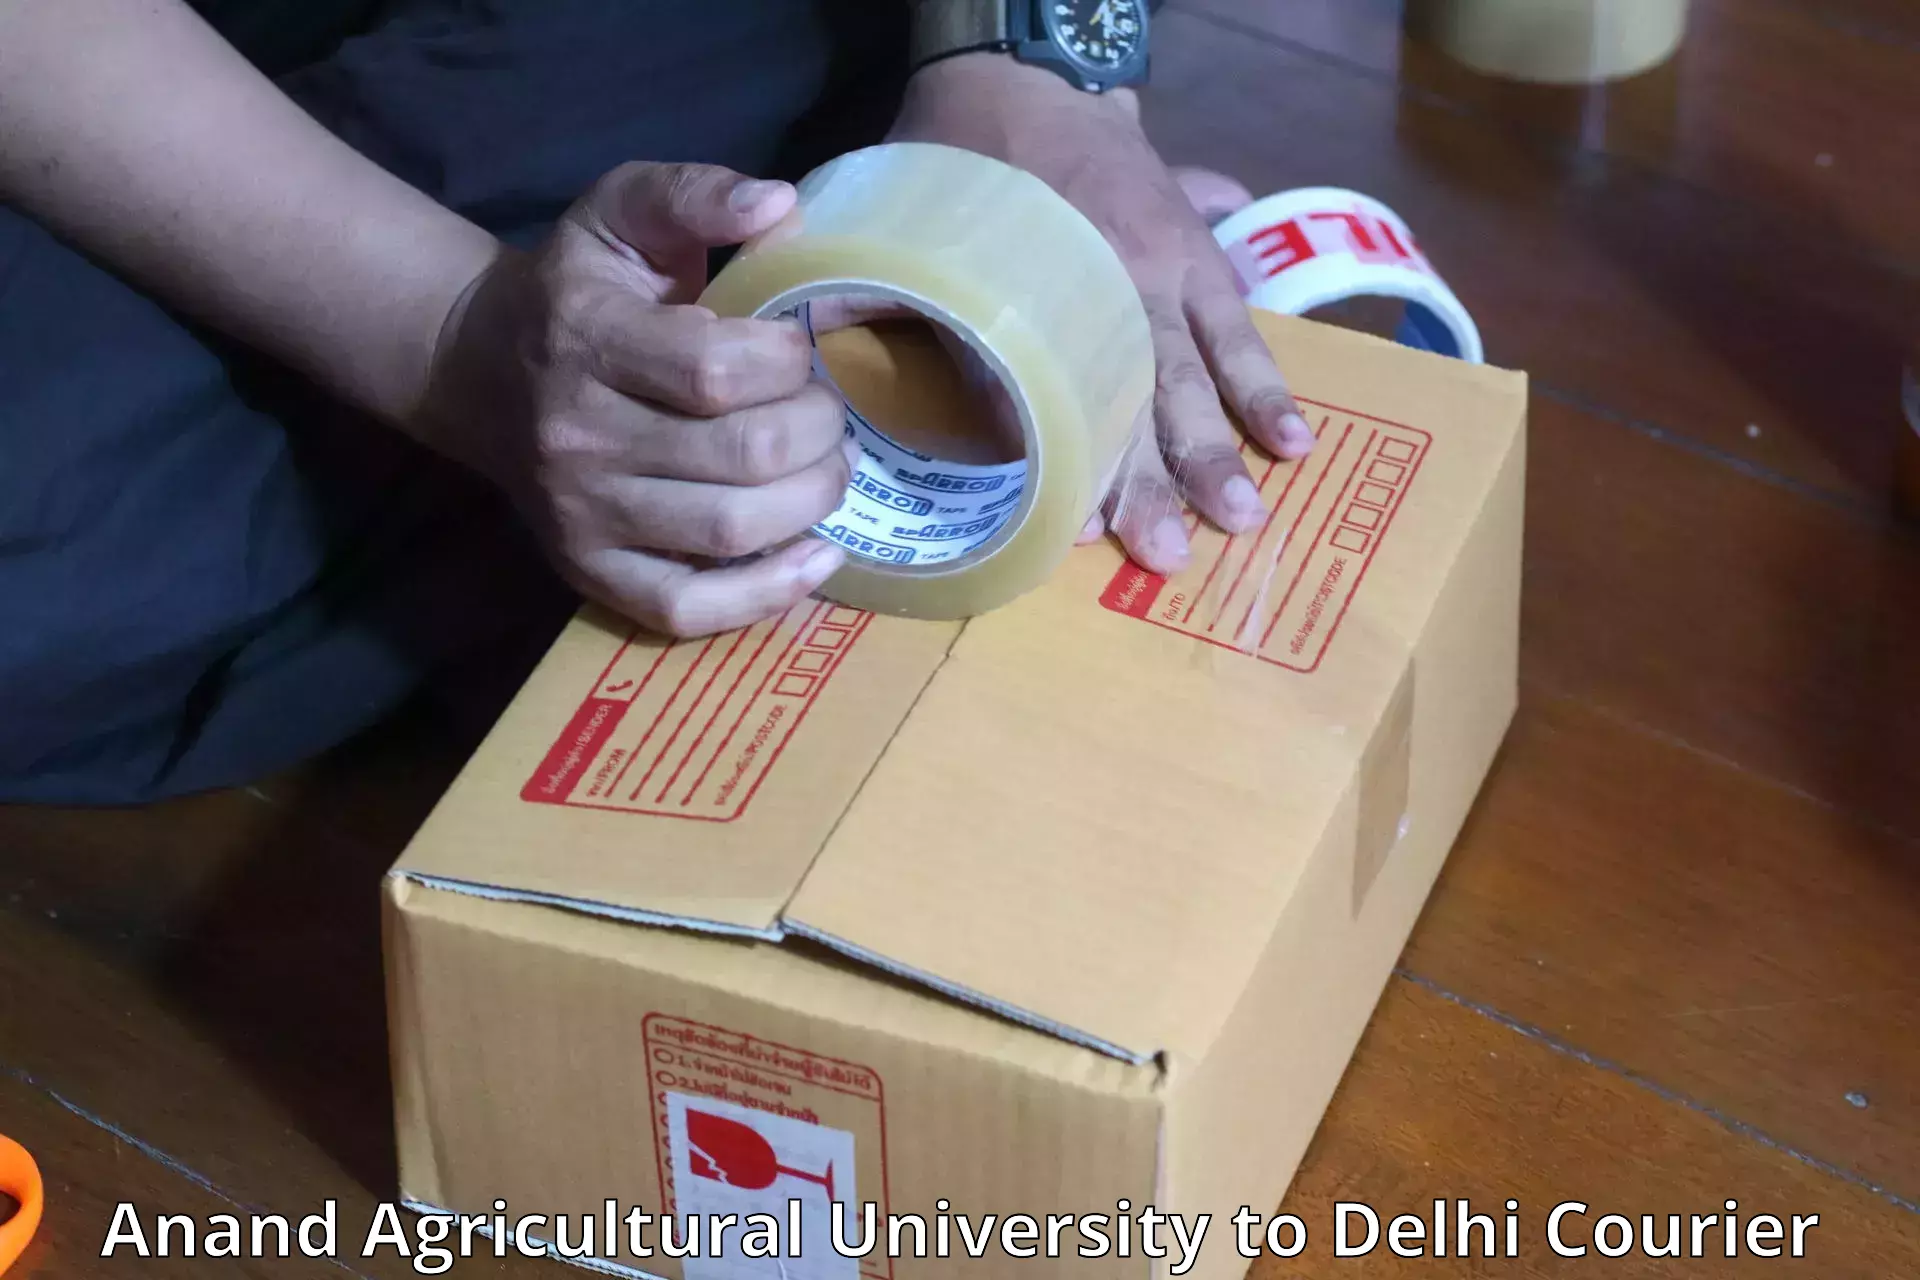 Luggage transport company Anand Agricultural University to Delhi